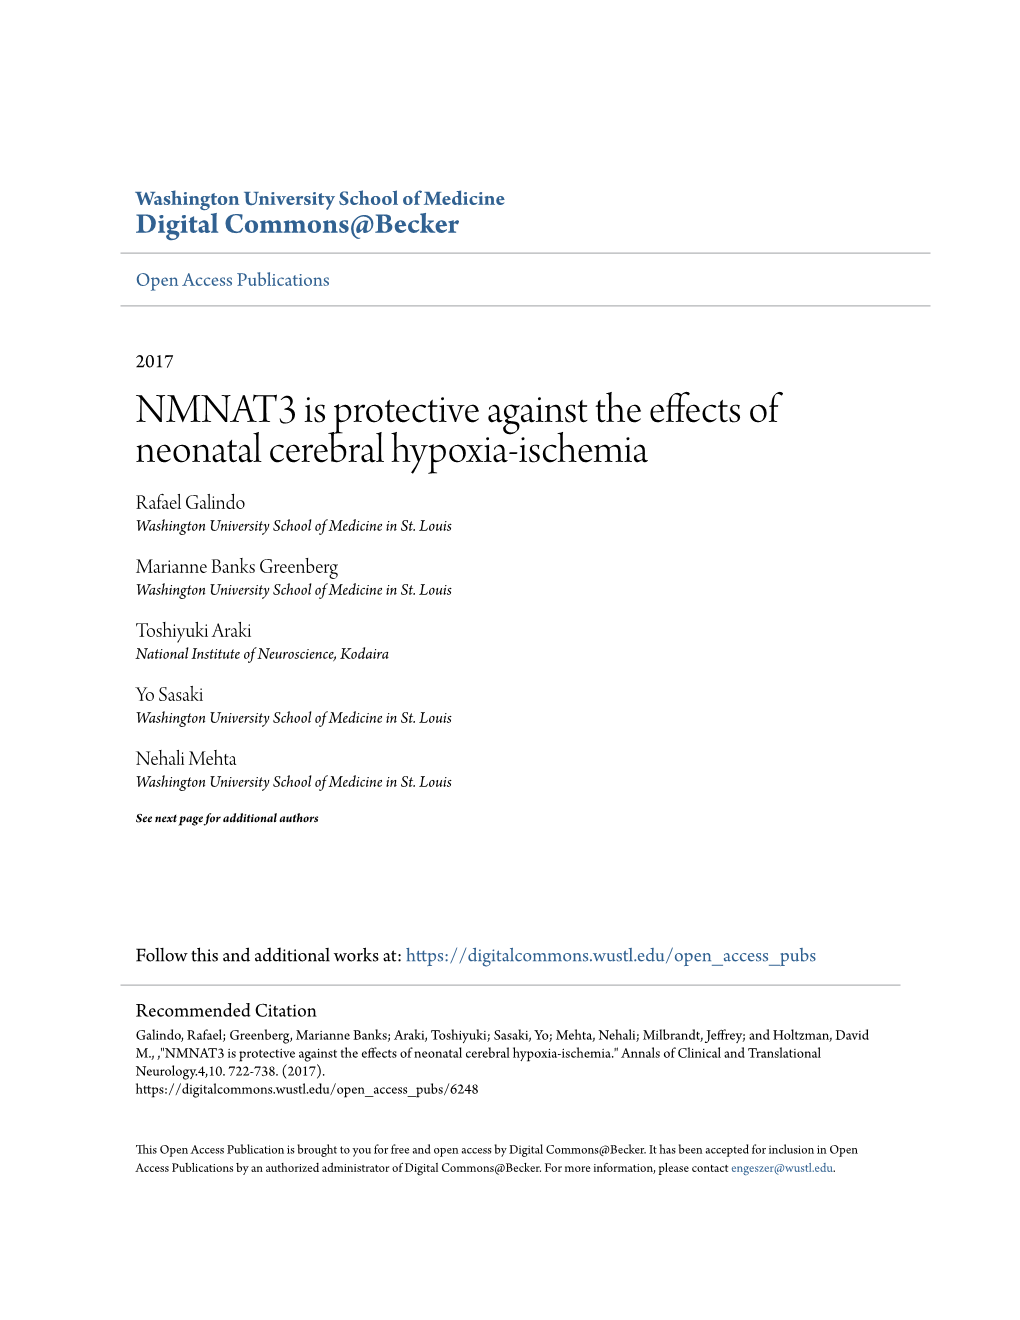 NMNAT3 Is Protective Against the Effects of Neonatal Cerebral Hypoxia-Ischemia Rafael Galindo Washington University School of Medicine in St